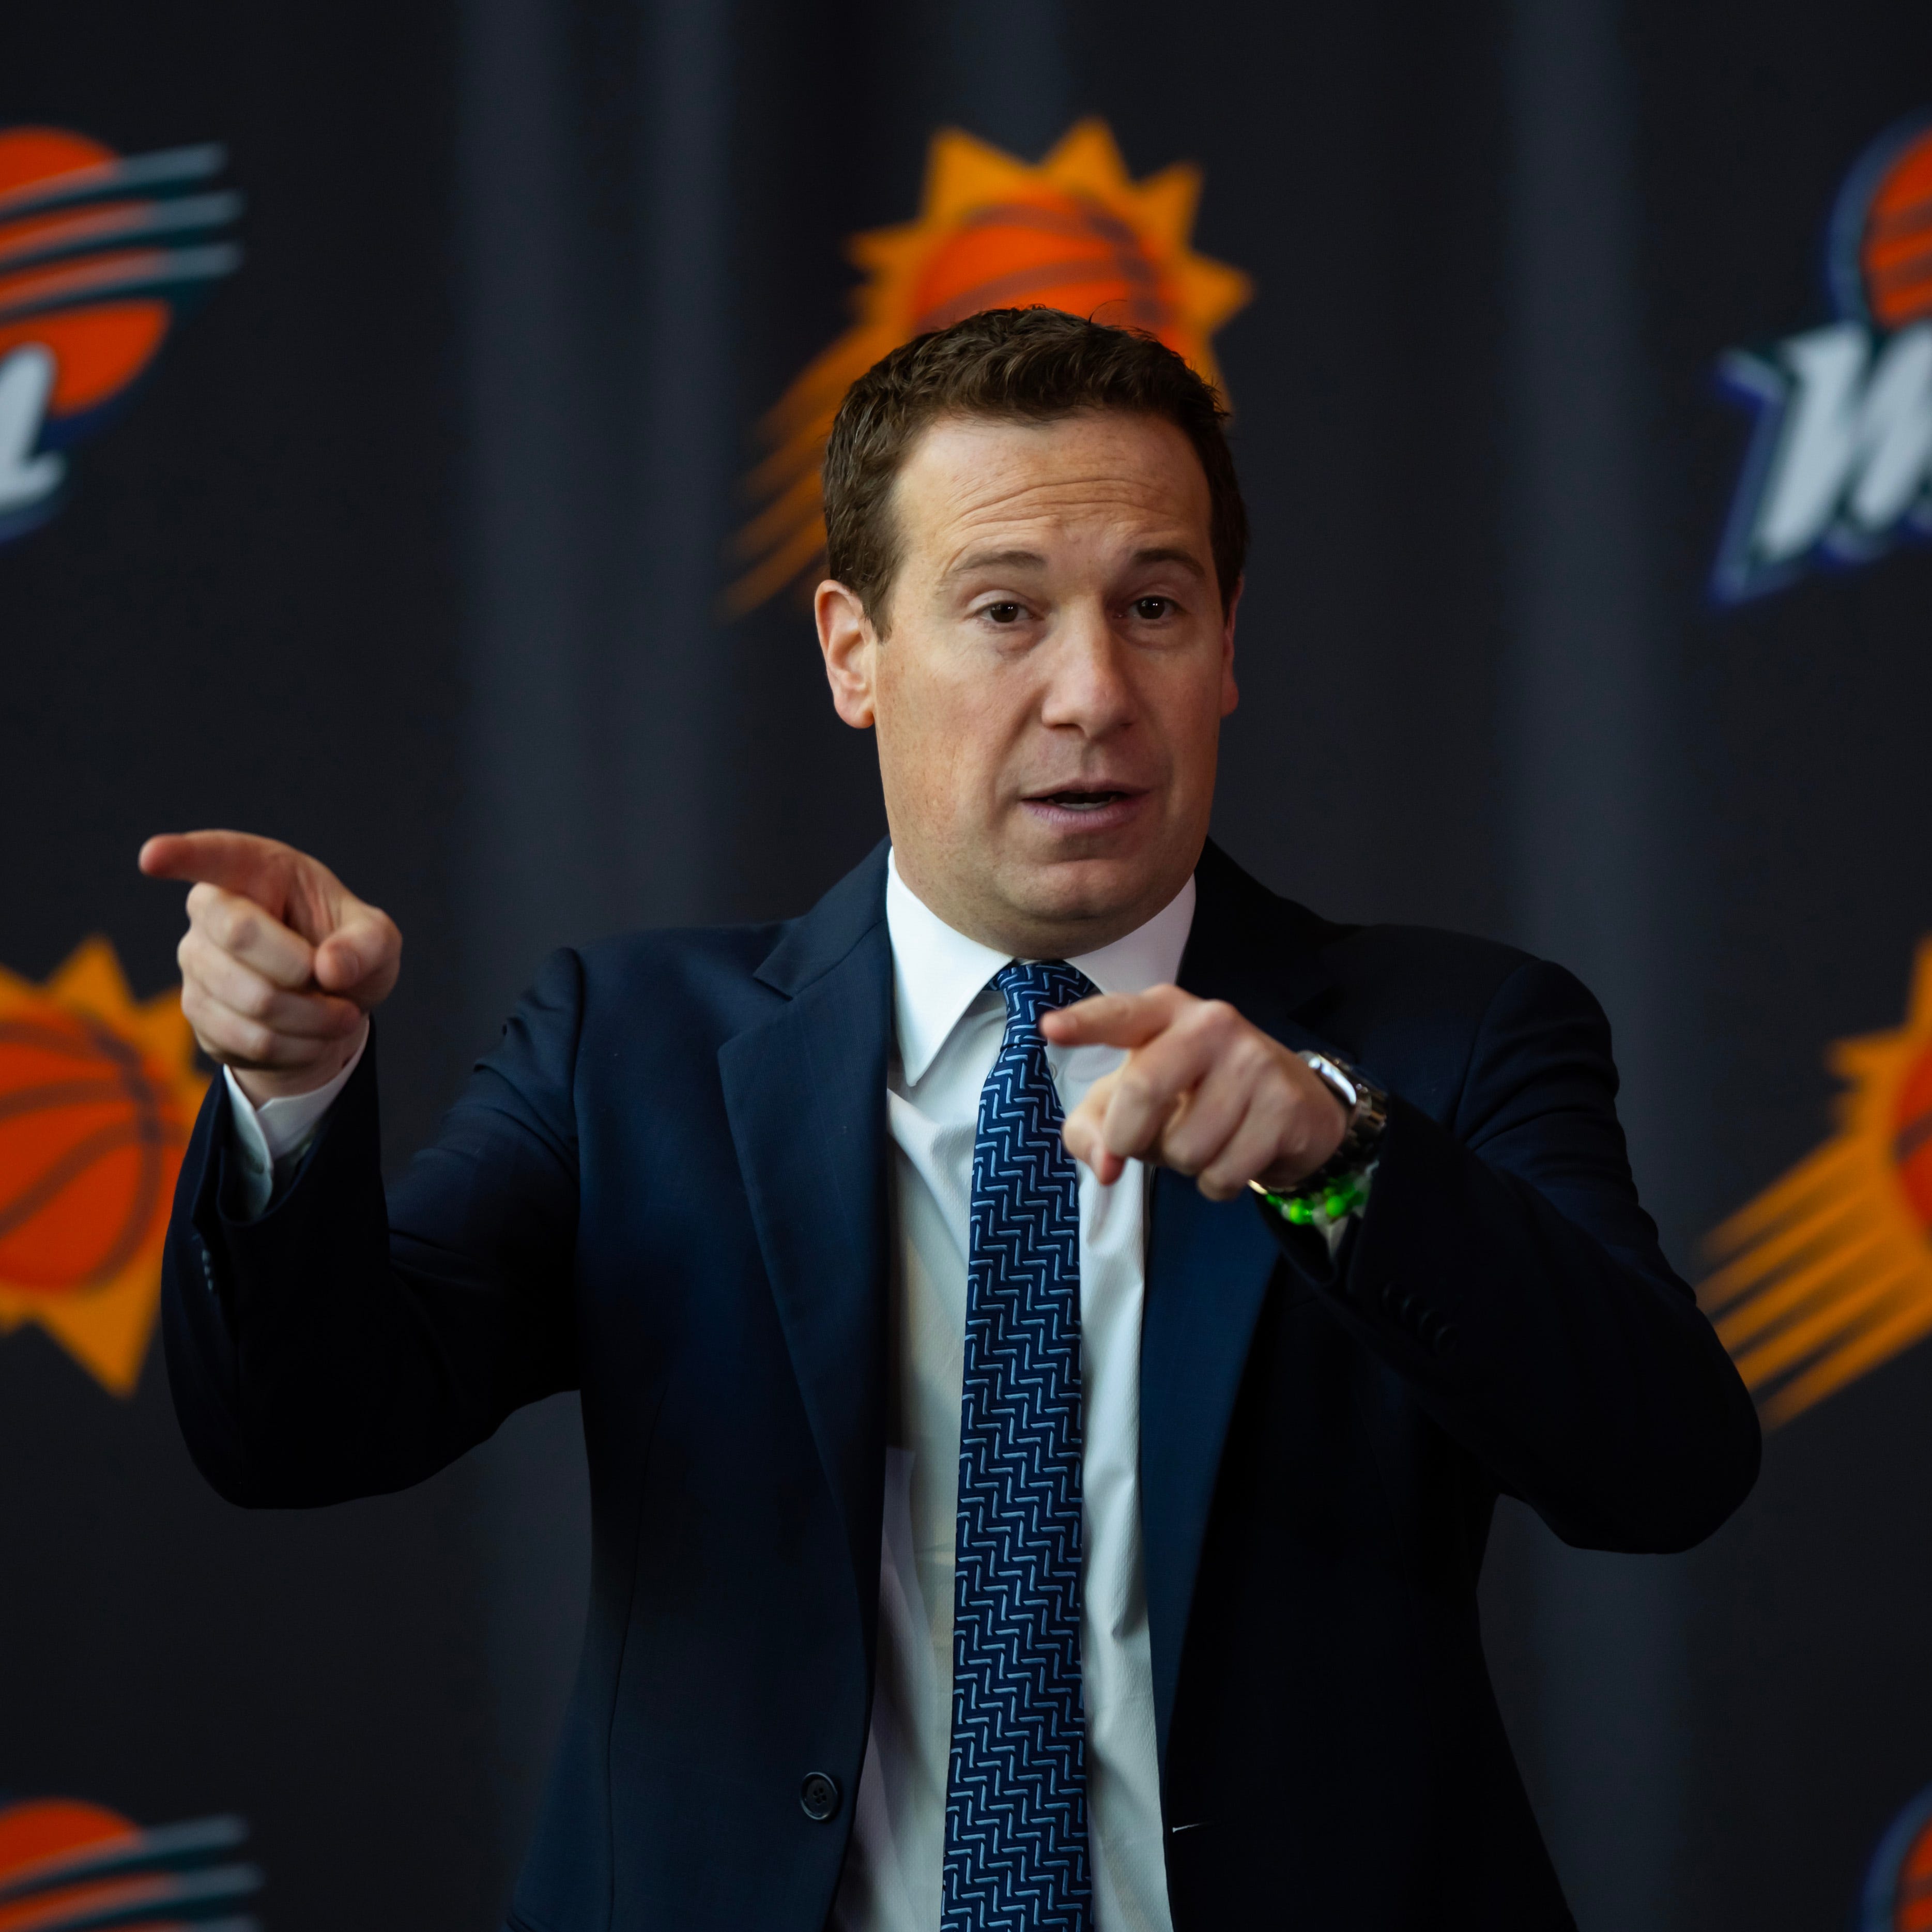 Phoenix Suns owner Mat Ishbia speaks to the media at an introductory news conference at Footprint Center in Phoenix, Feb. 8, 2023.